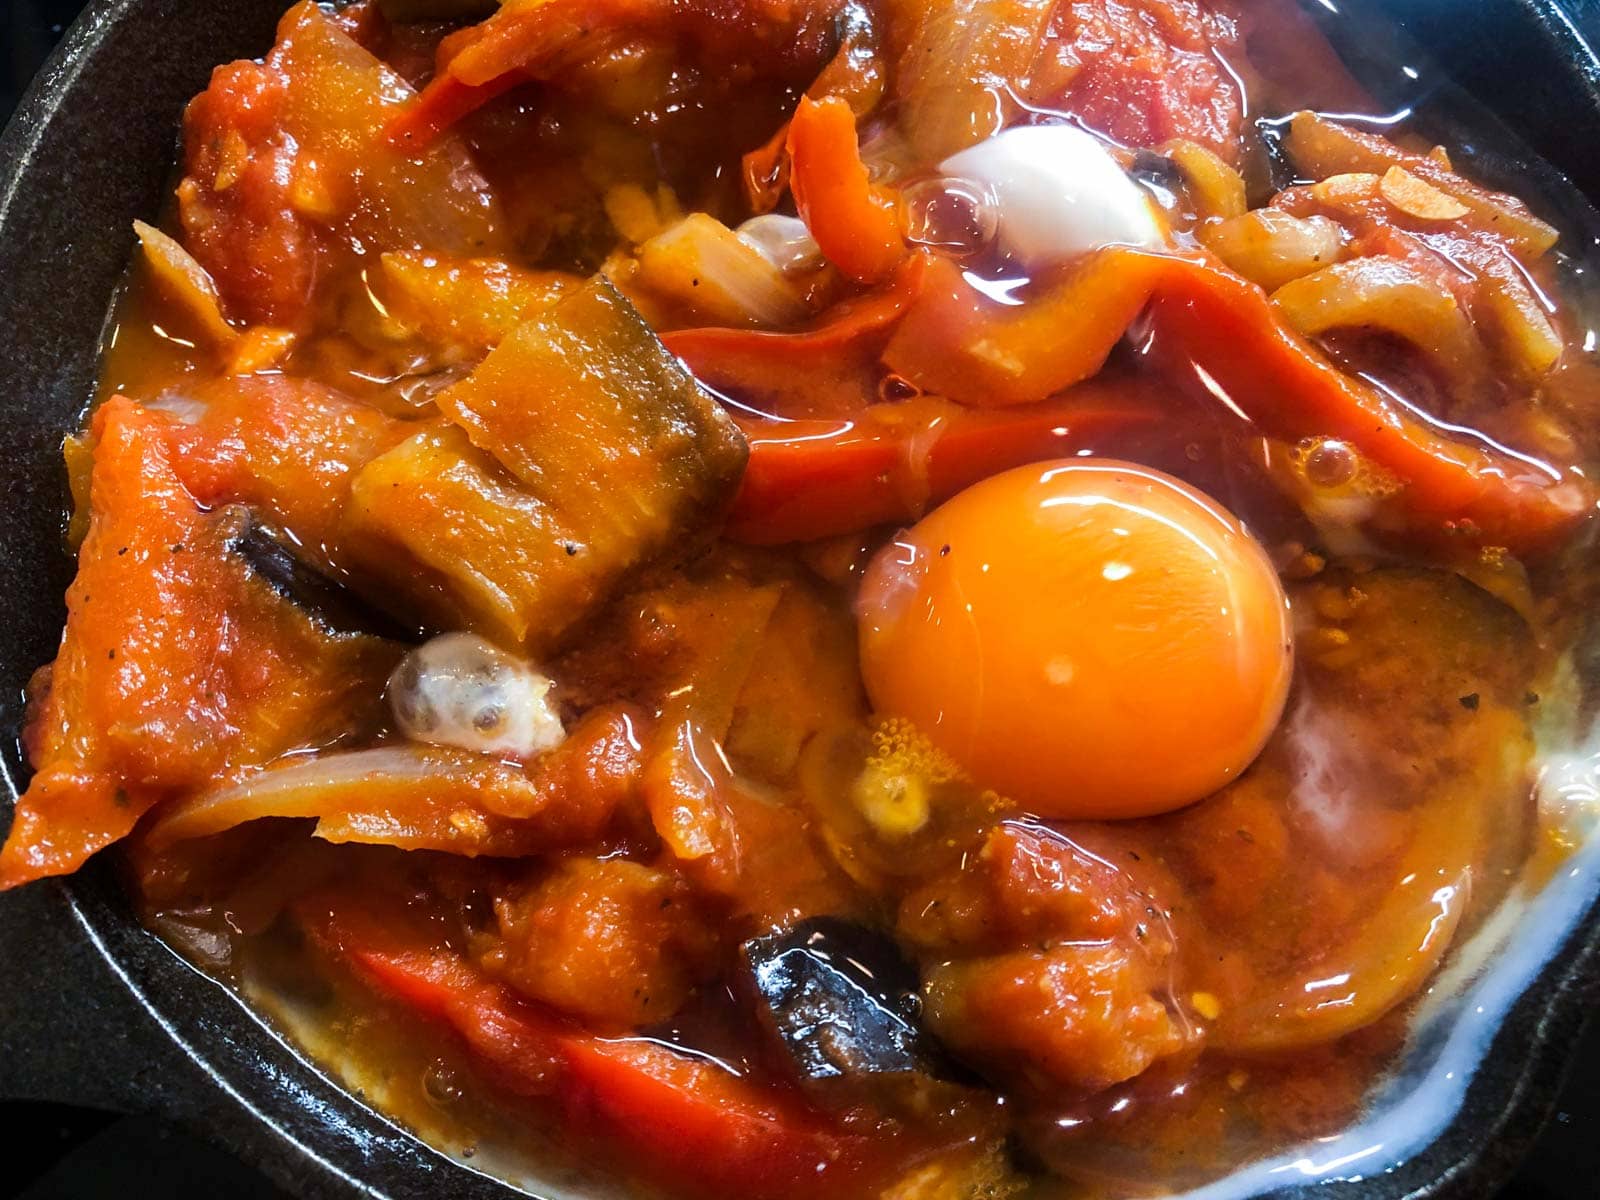 Eggs added to cooked spicy vegetables to bake for a perfect brunch dish.